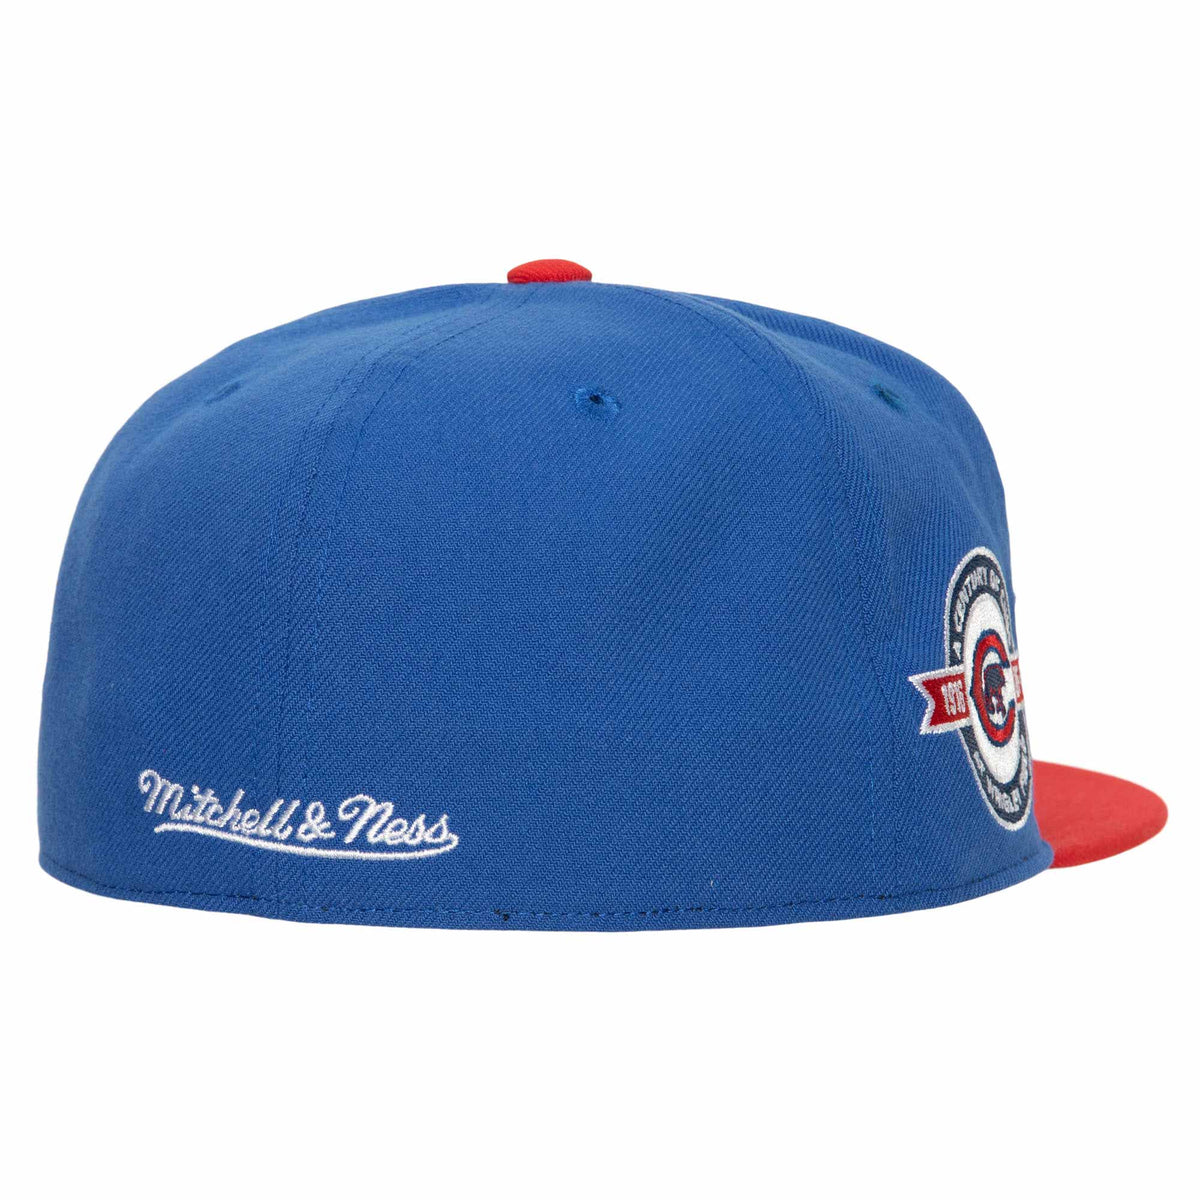 Chicago Cubs Bases Loaded Cooperstown Fitted Cap – Wrigleyville Sports